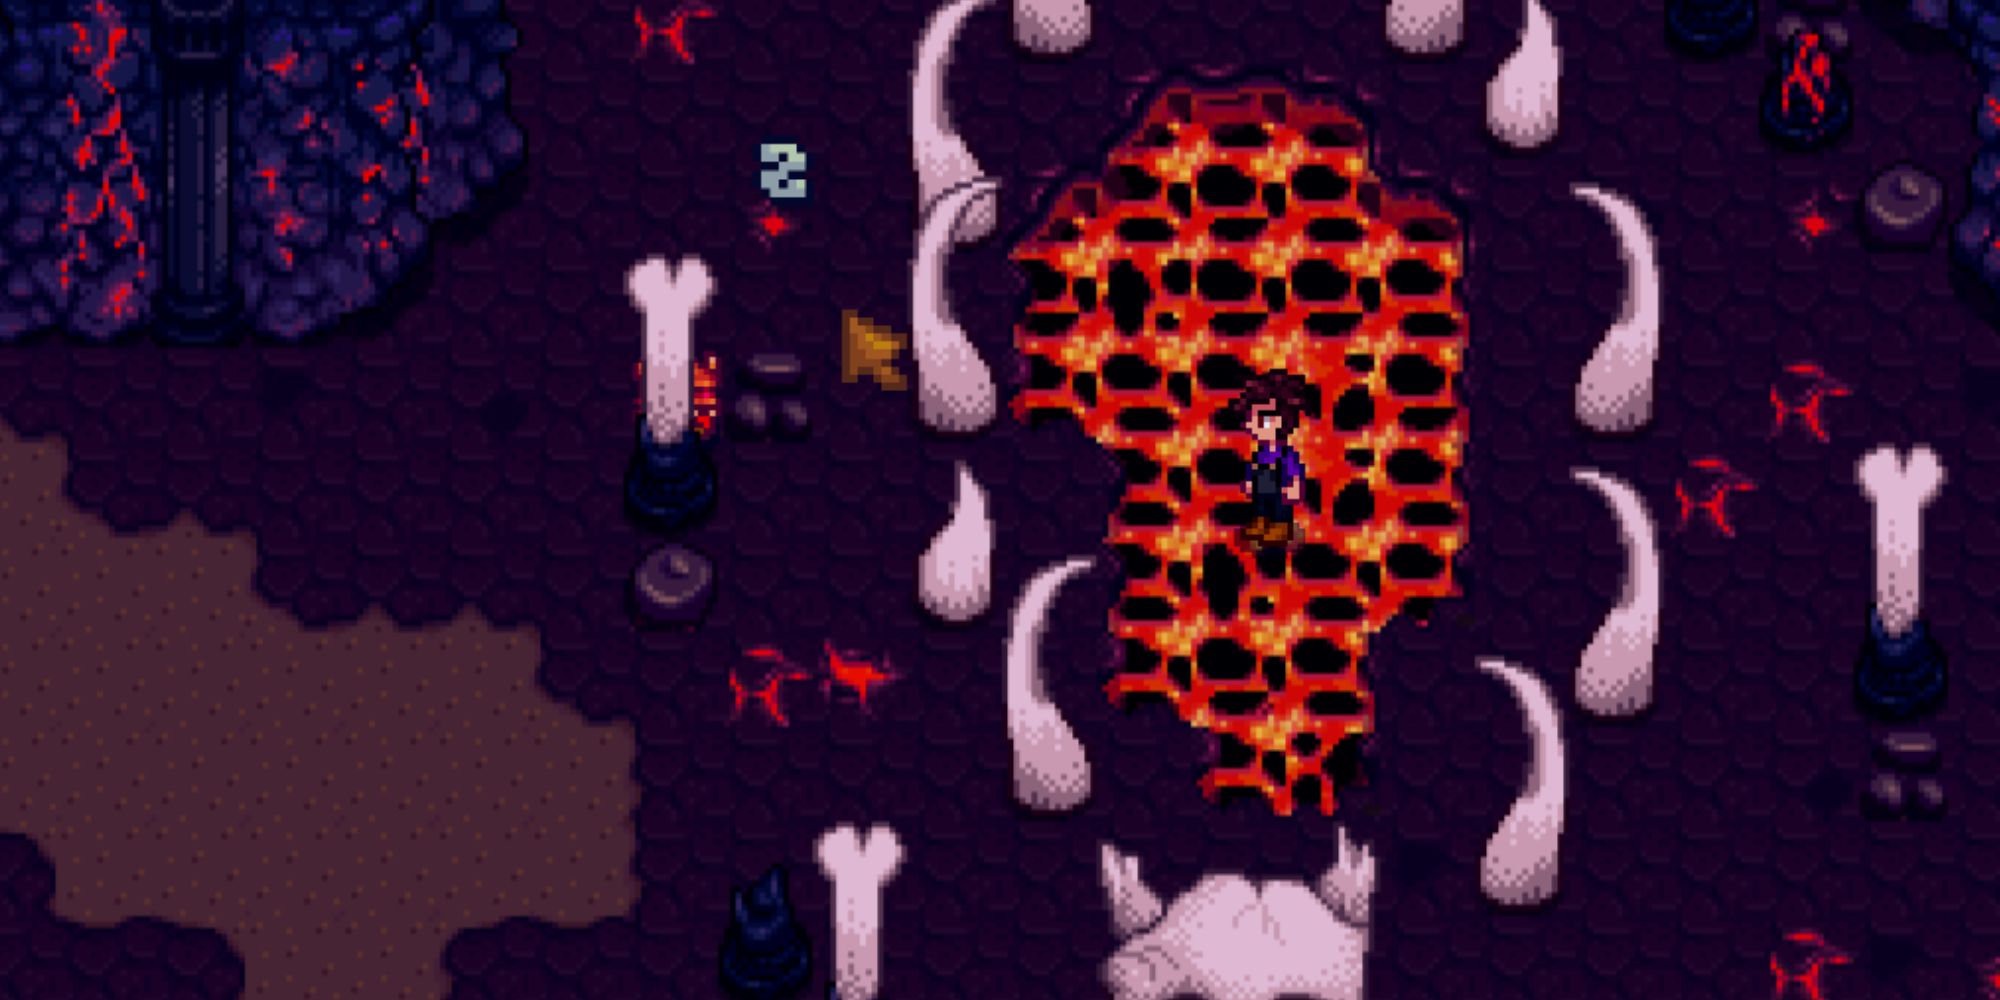 Stardew Valley character stood in a pool of lava fighting a monster